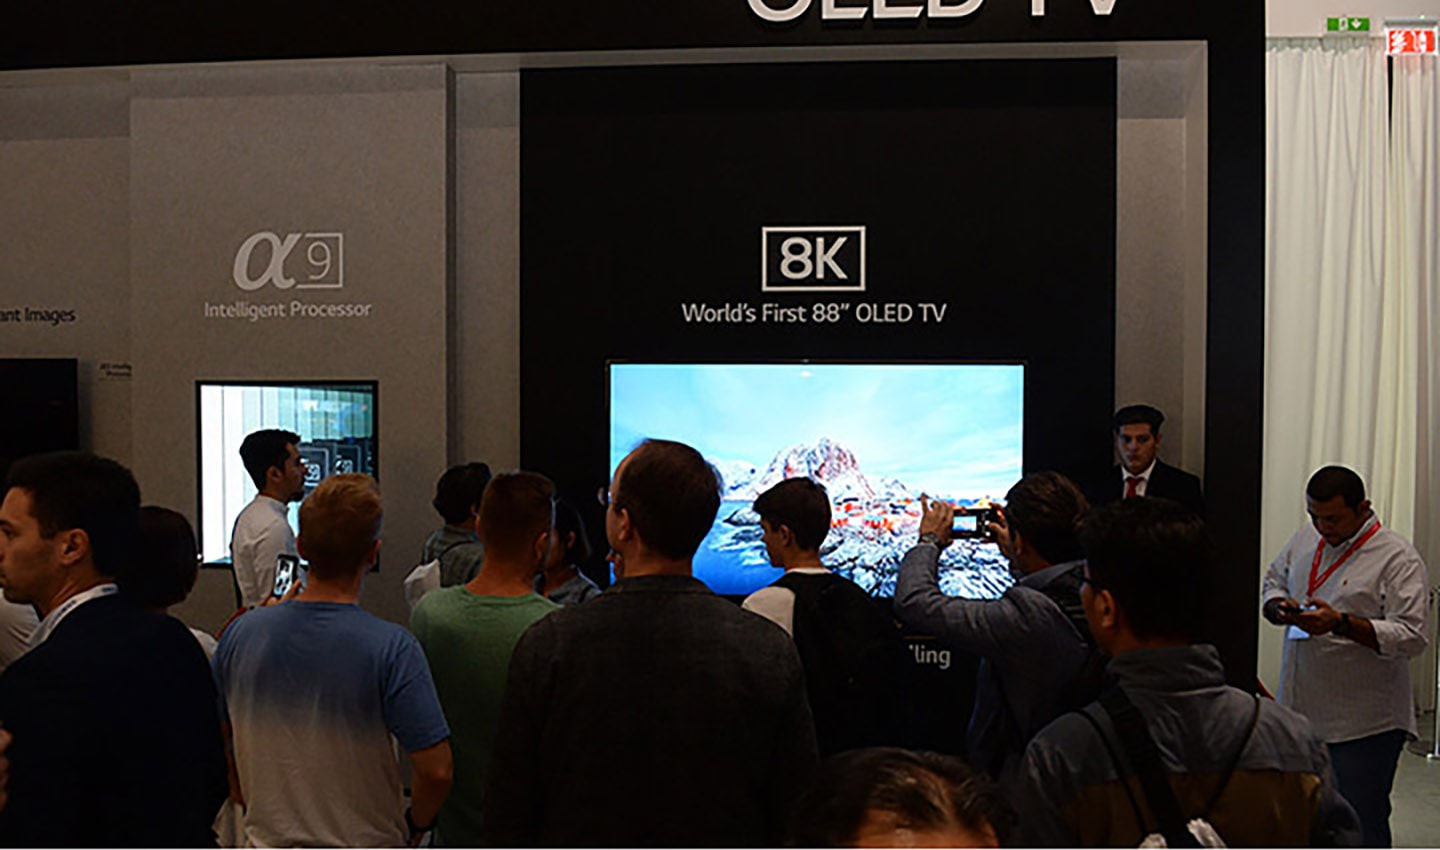 World’s First 8K OLED TV with A9 Intelligent Processor display zone at IFA 2018 with conference attendees walking around and looking at the display